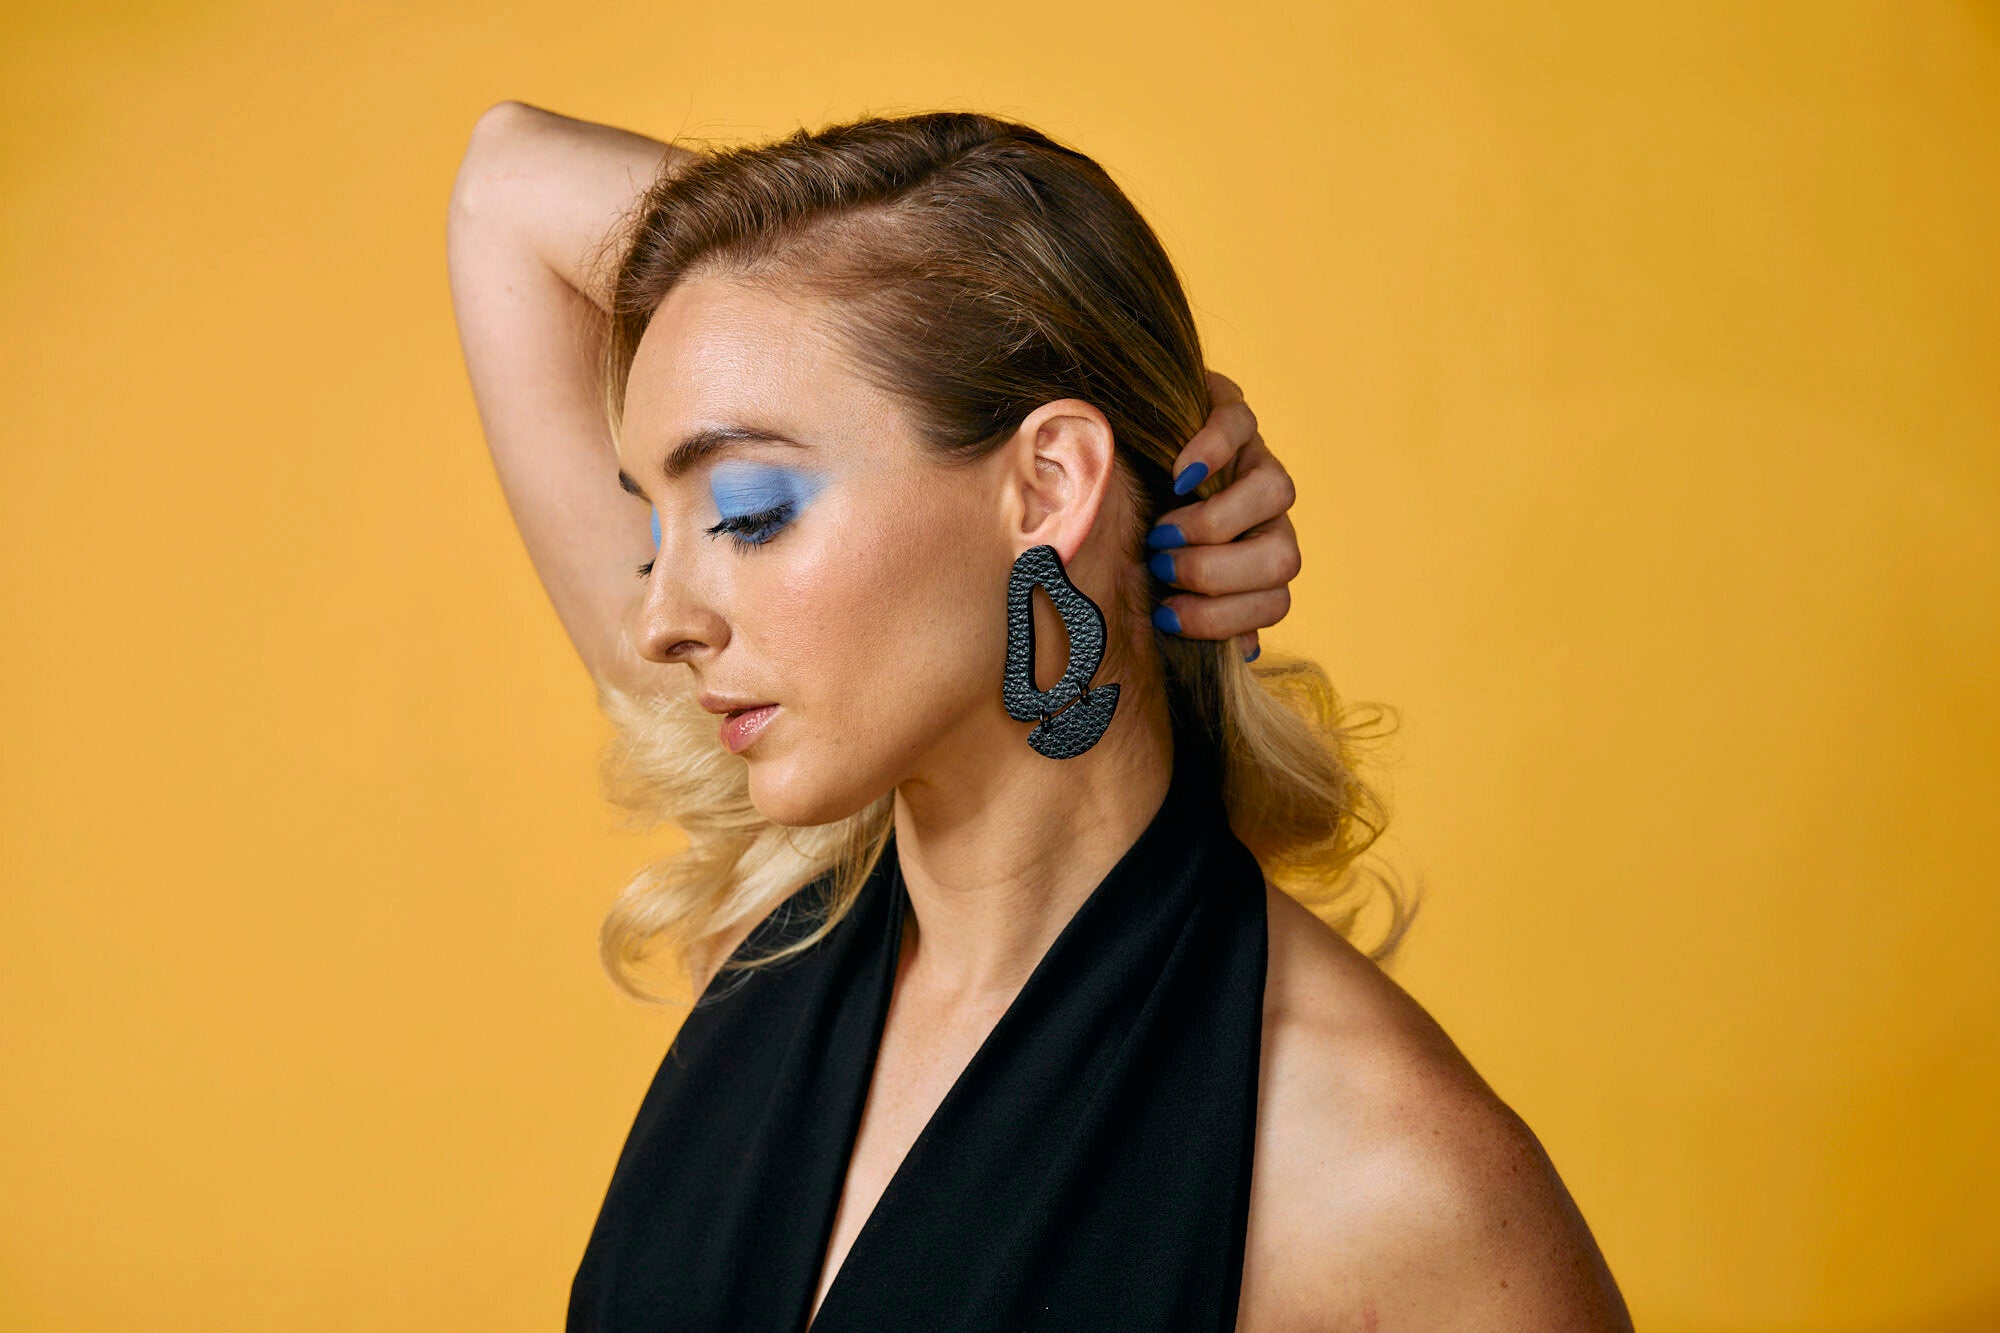 A blonde model against a yellow background poses wearing the black leather inferno statement earrings.